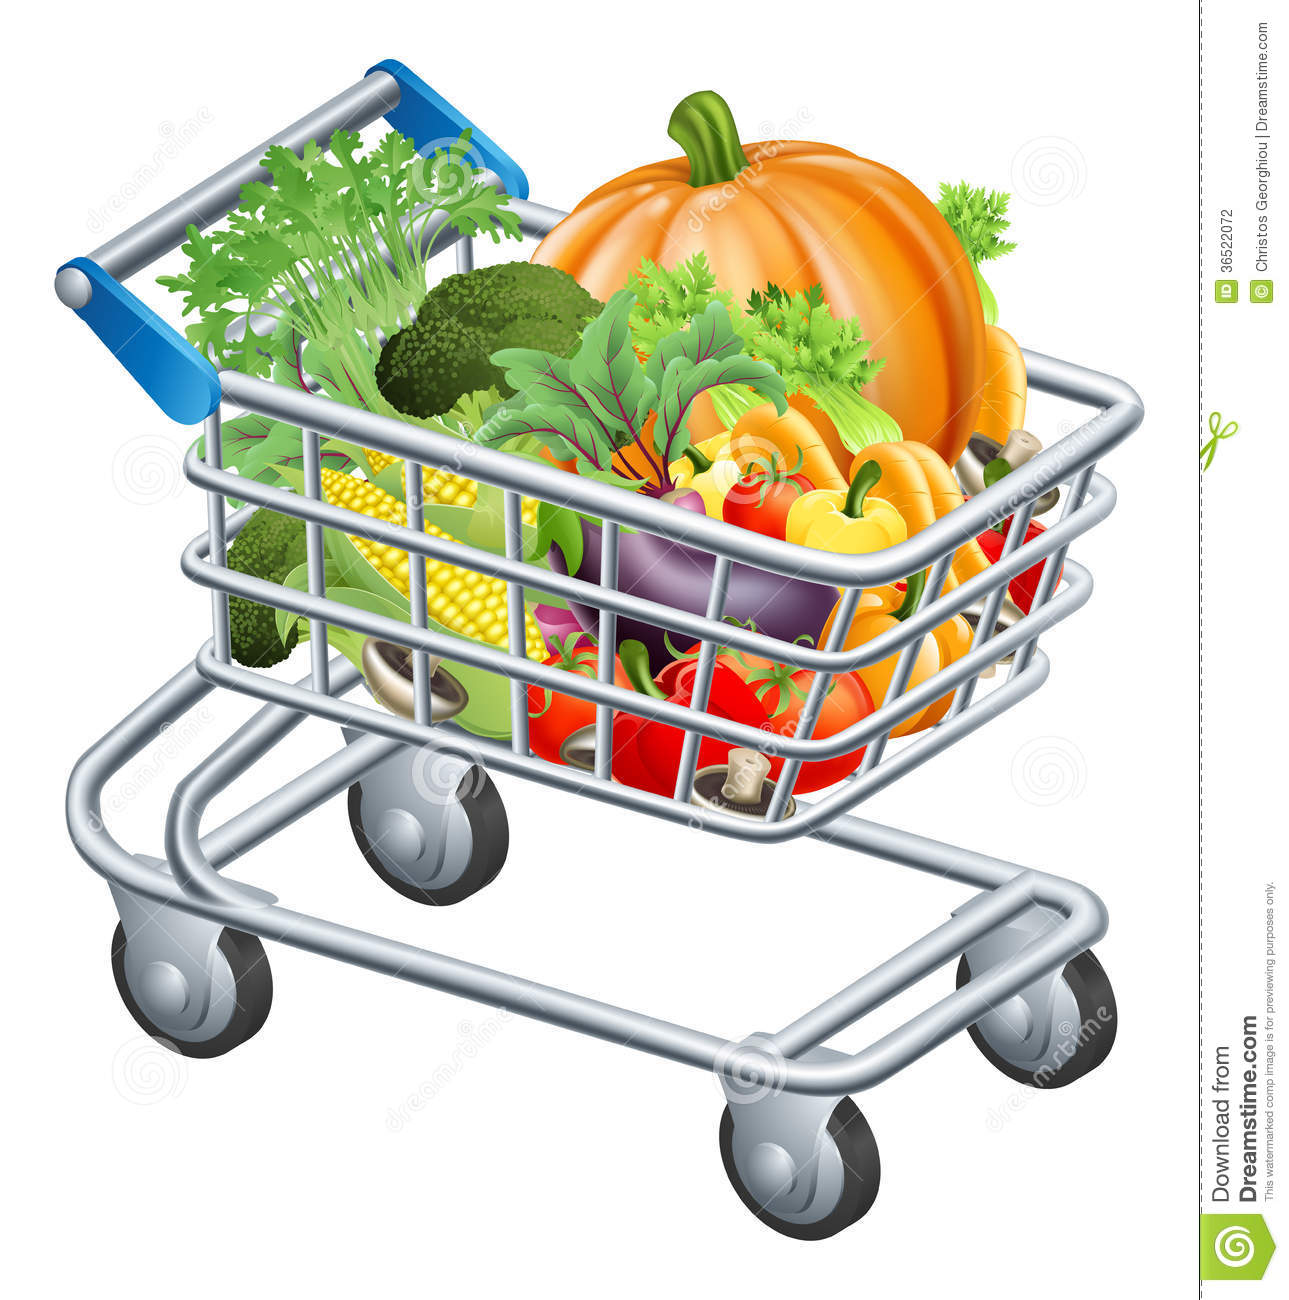 An Illustration Of A Trolley Or Supermarket Shopping Cart Full Of